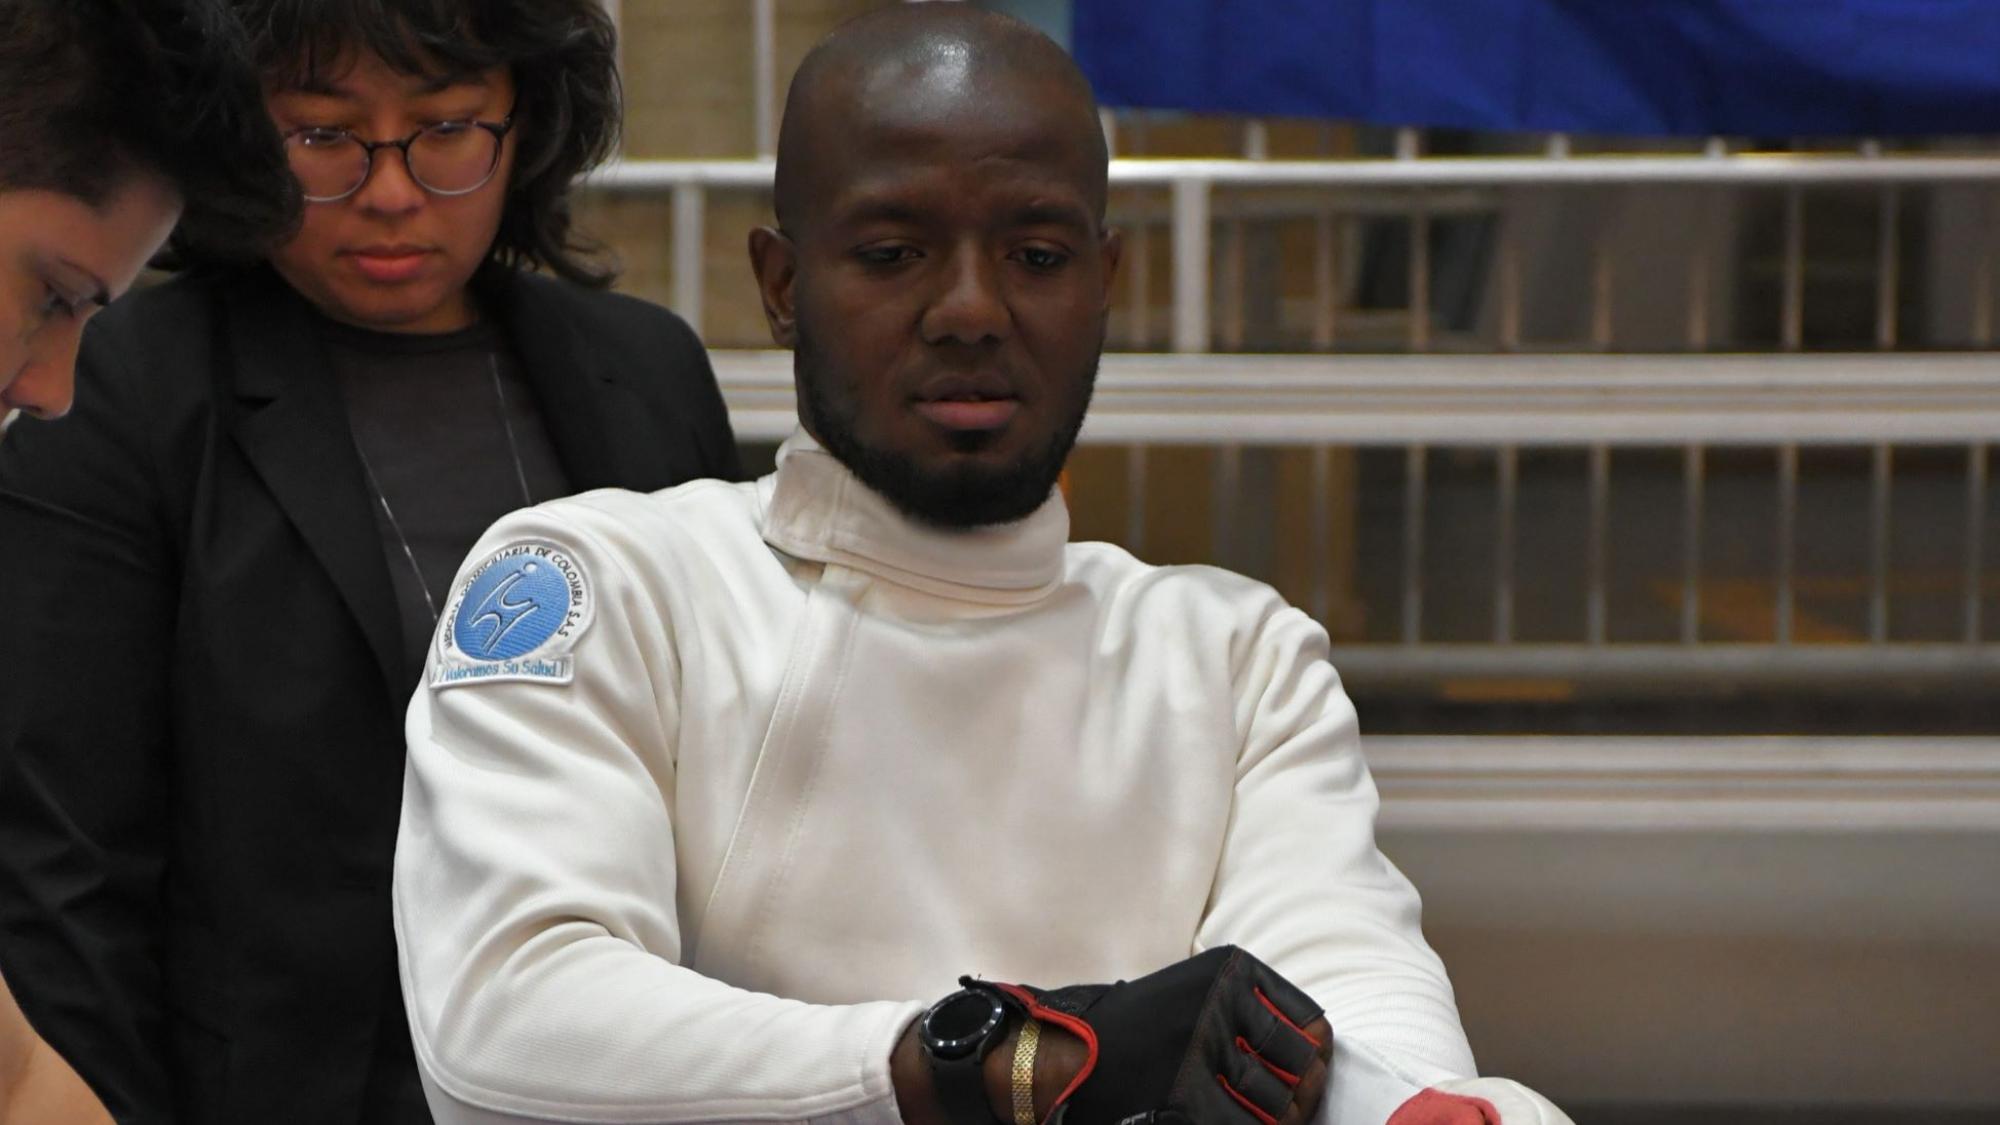 Amelio Castro Gruesso, a member of the Refugee Paralympic Team at Paris 2024, is wearing his wheelchair fencing gear